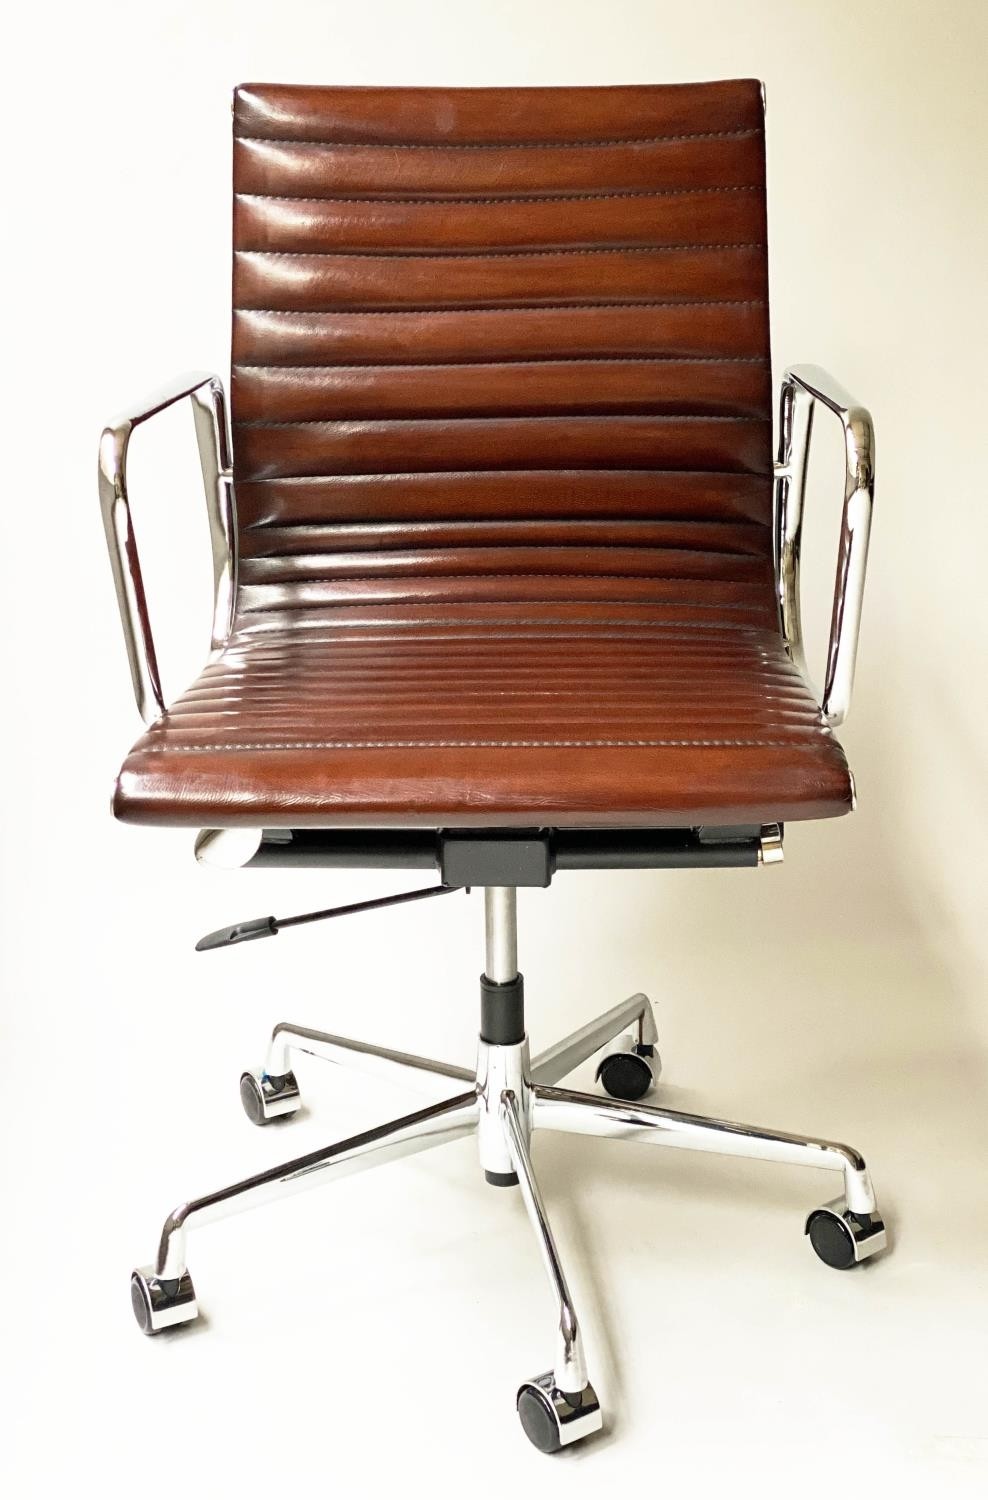 REVOLVING DESK CHAIR, Charles and Ray Eames inspired with ribbed mid brown leather seat revolving - Image 3 of 8